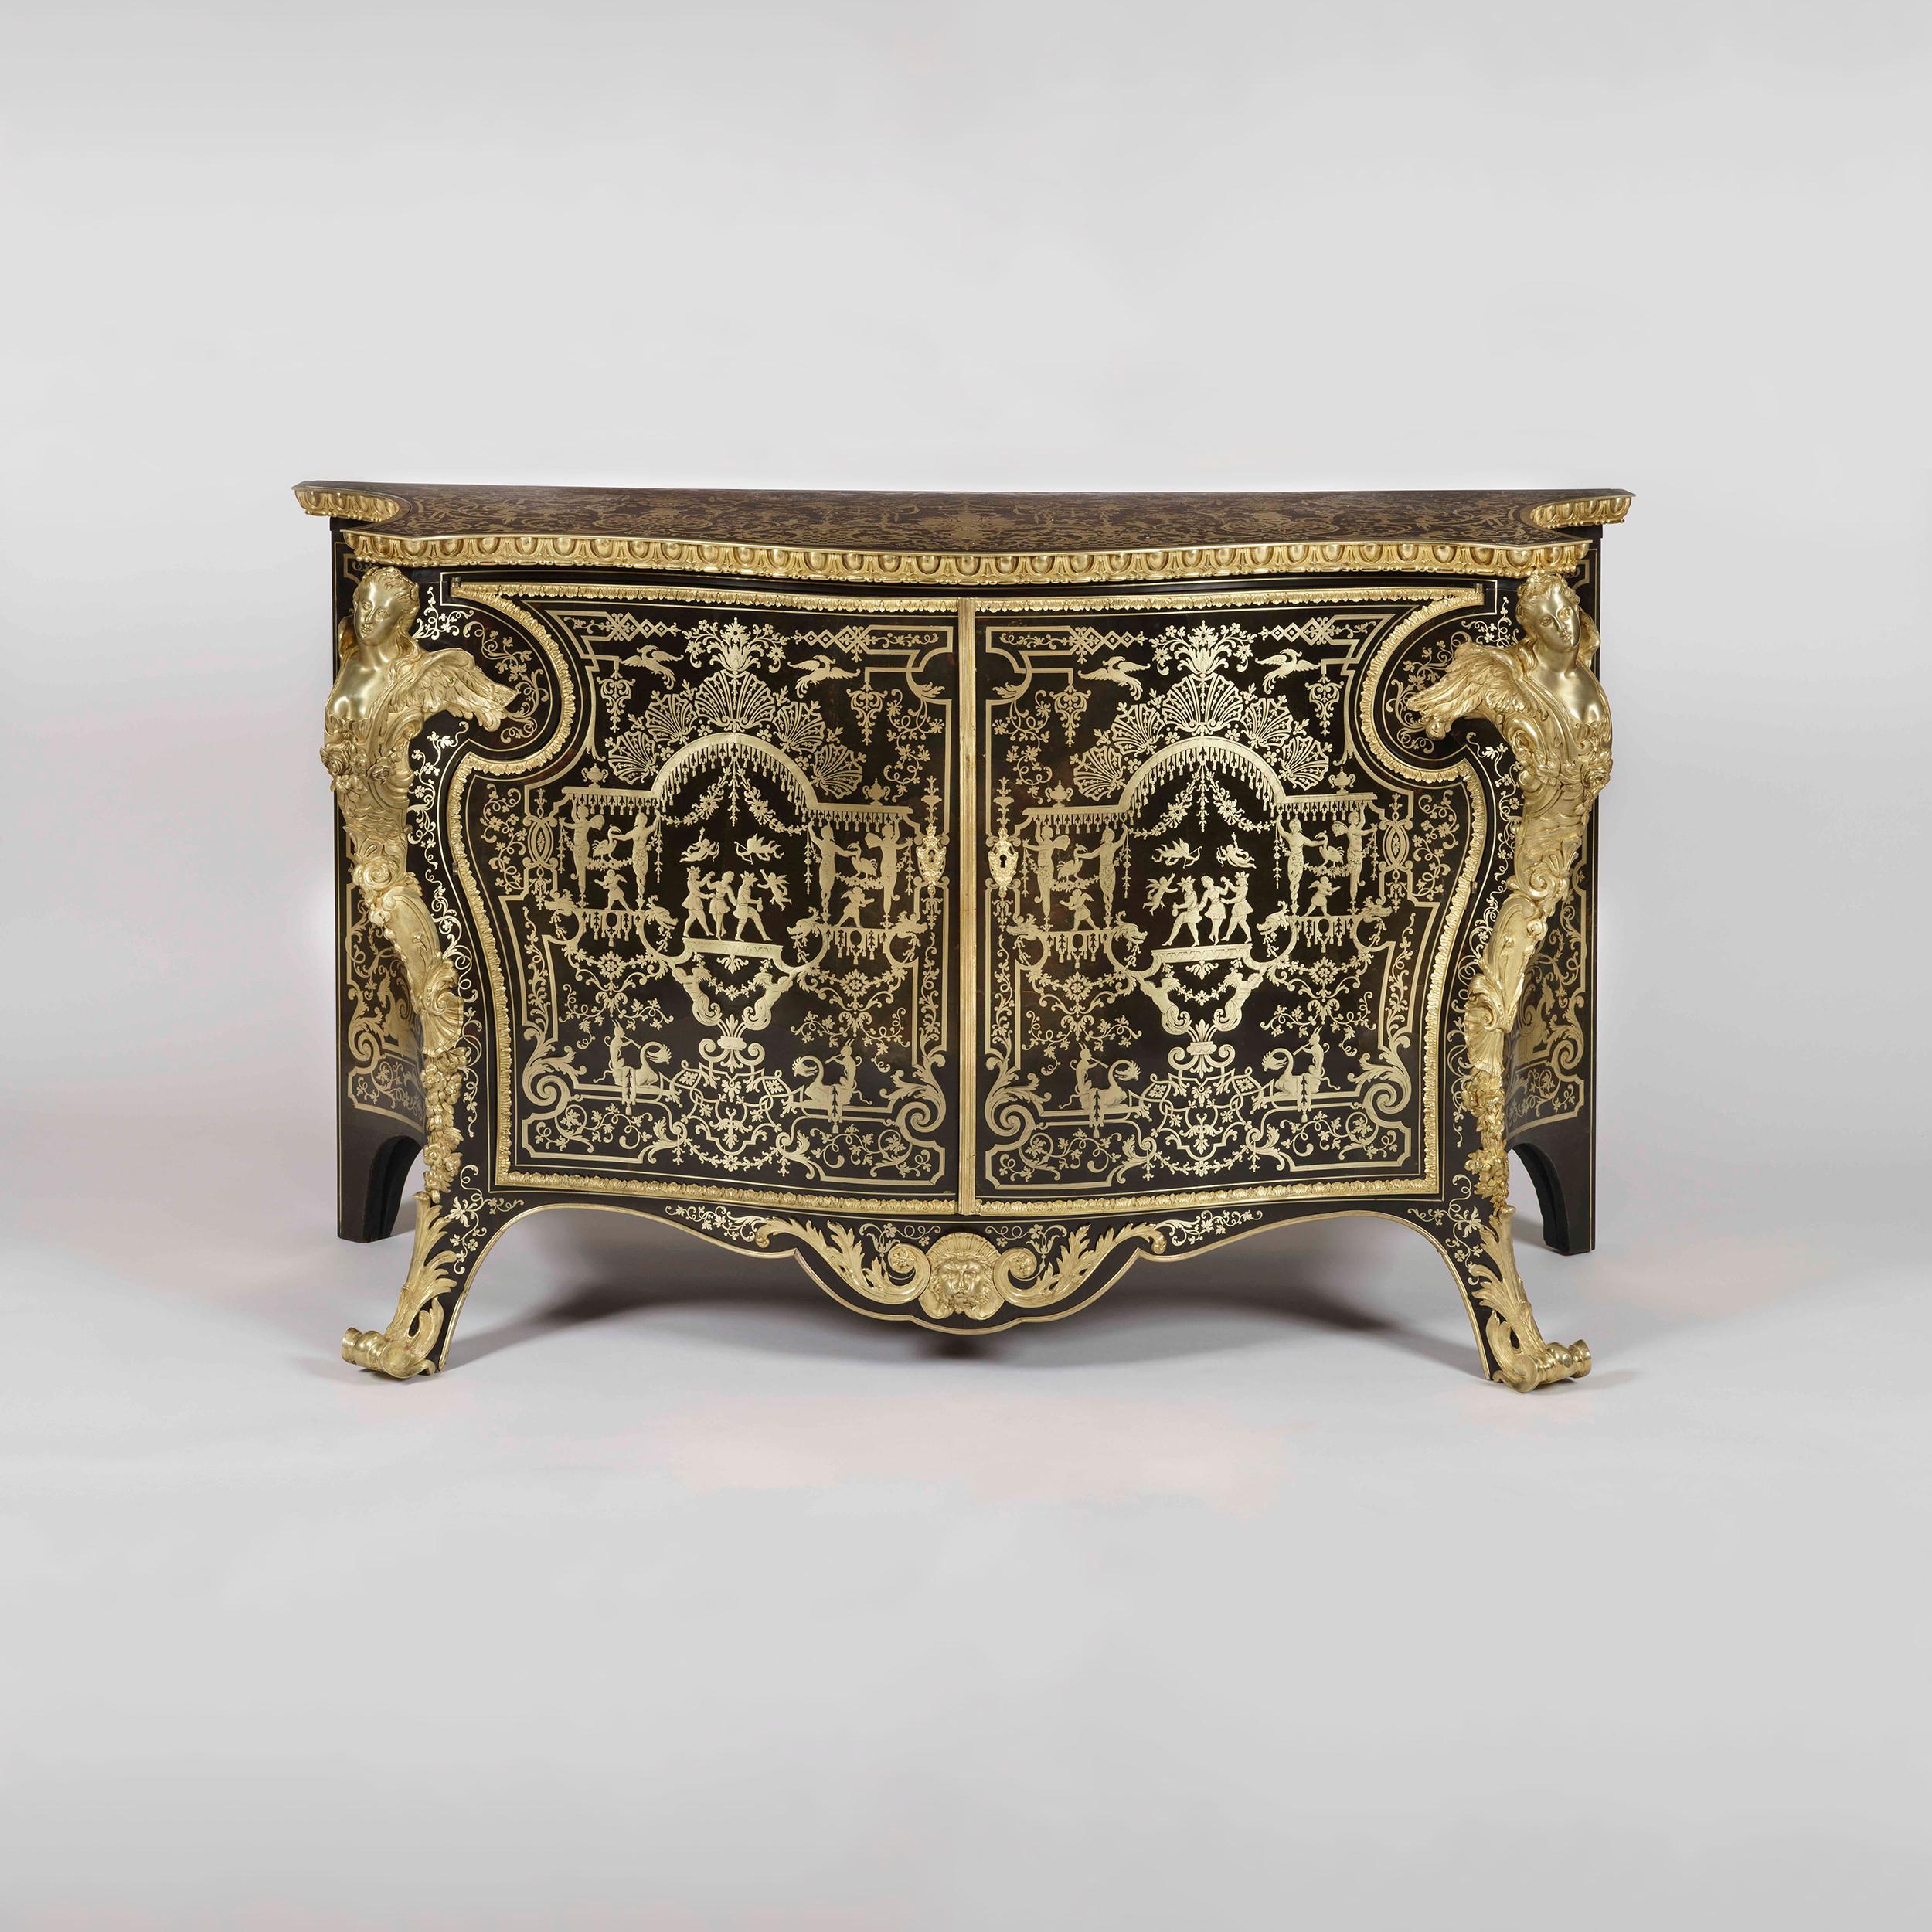 A fine commode By Mellier and Company in the manner of André-Charles Boulle.

Of serpentine form, constructed in ebony with premier-partie inlay into tortoise shell, using designs in the manner of Jean Berain the Elder (1640-1711), and decorated